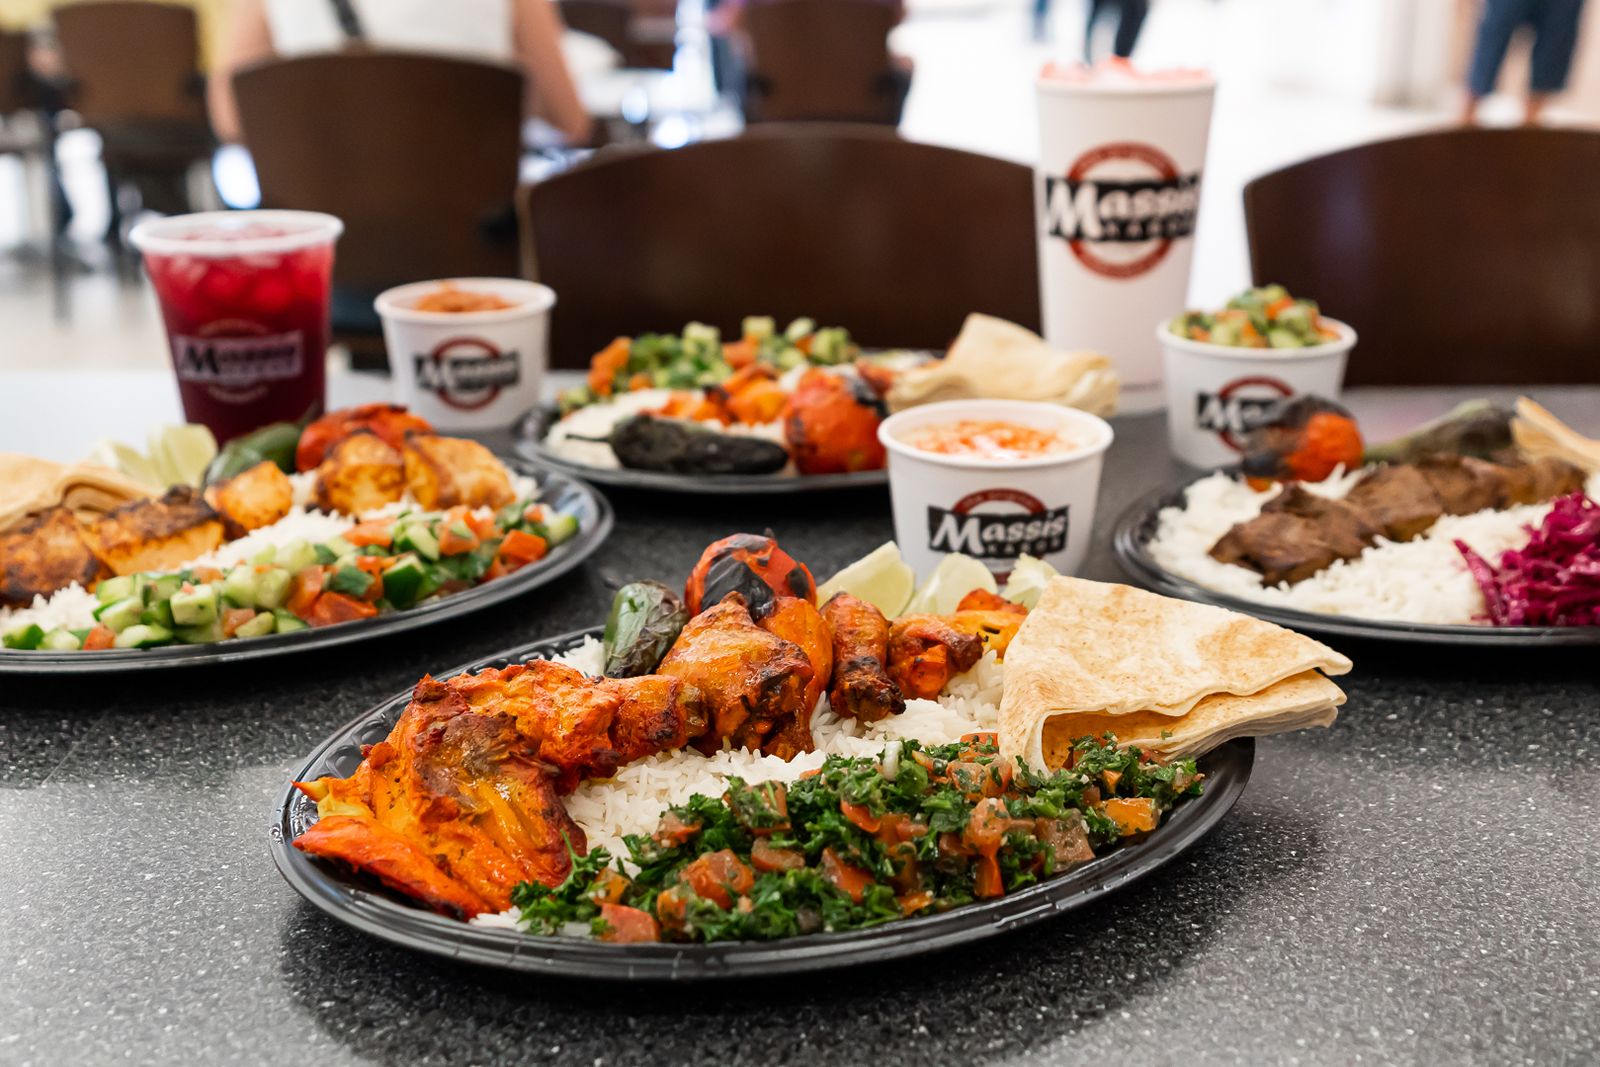 Massis Kabob Debuts First Standalone Restaurant Set to Open August 2022